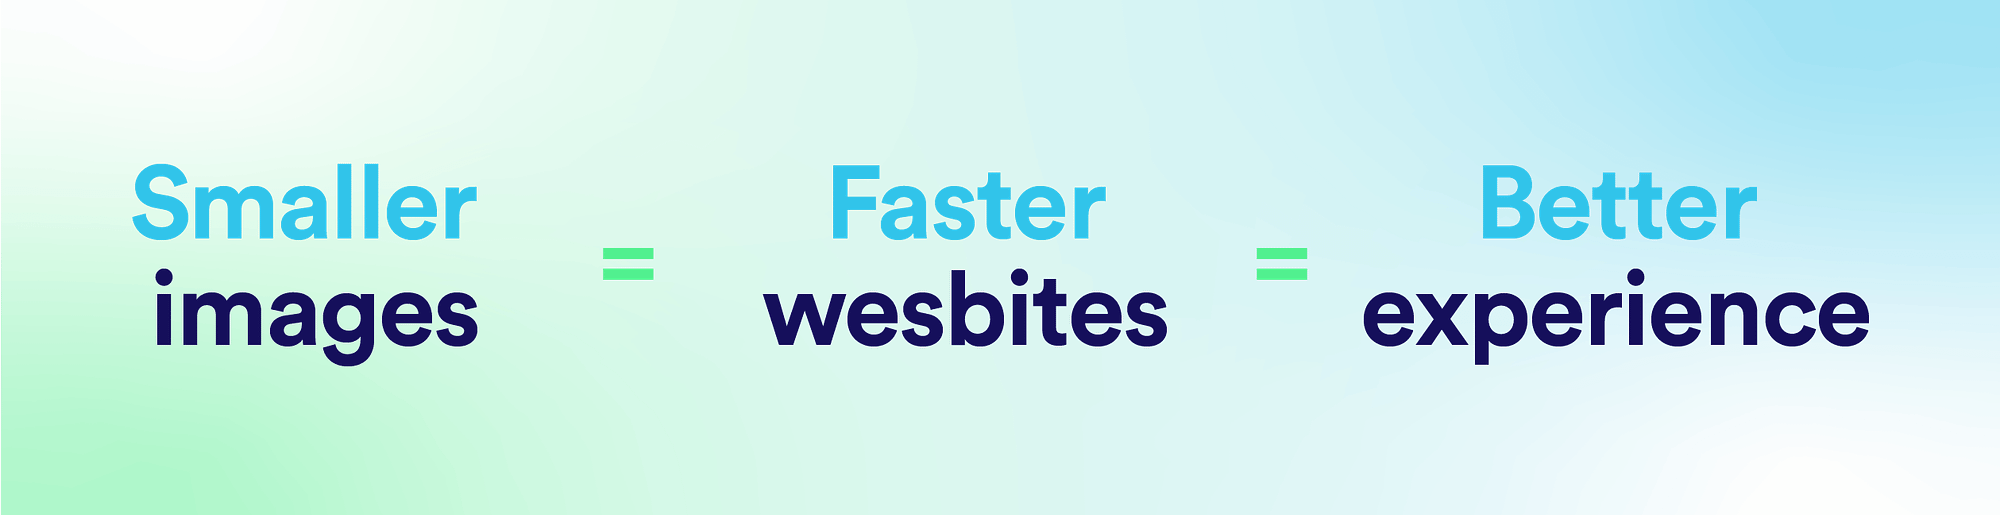 smaller images = faster websites = better experience